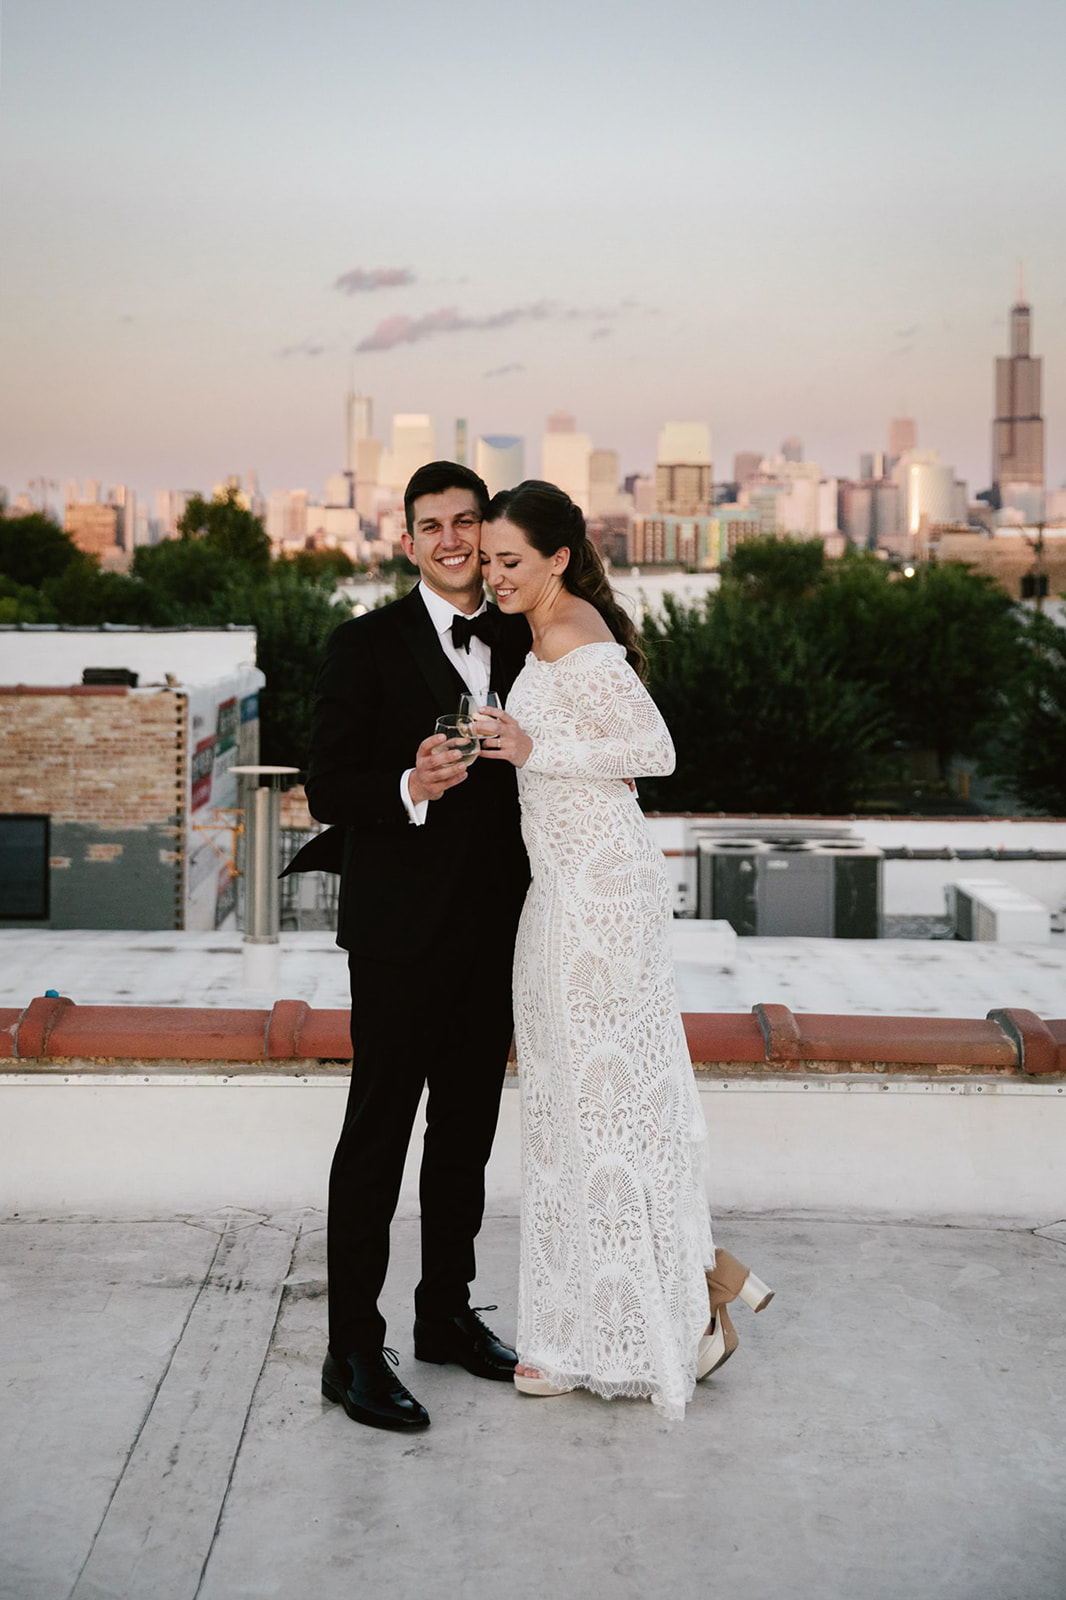 Romantic moment at Walden Chicago: Couple on rooftop at sunset, toasting with champagne against a stunning backdrop.